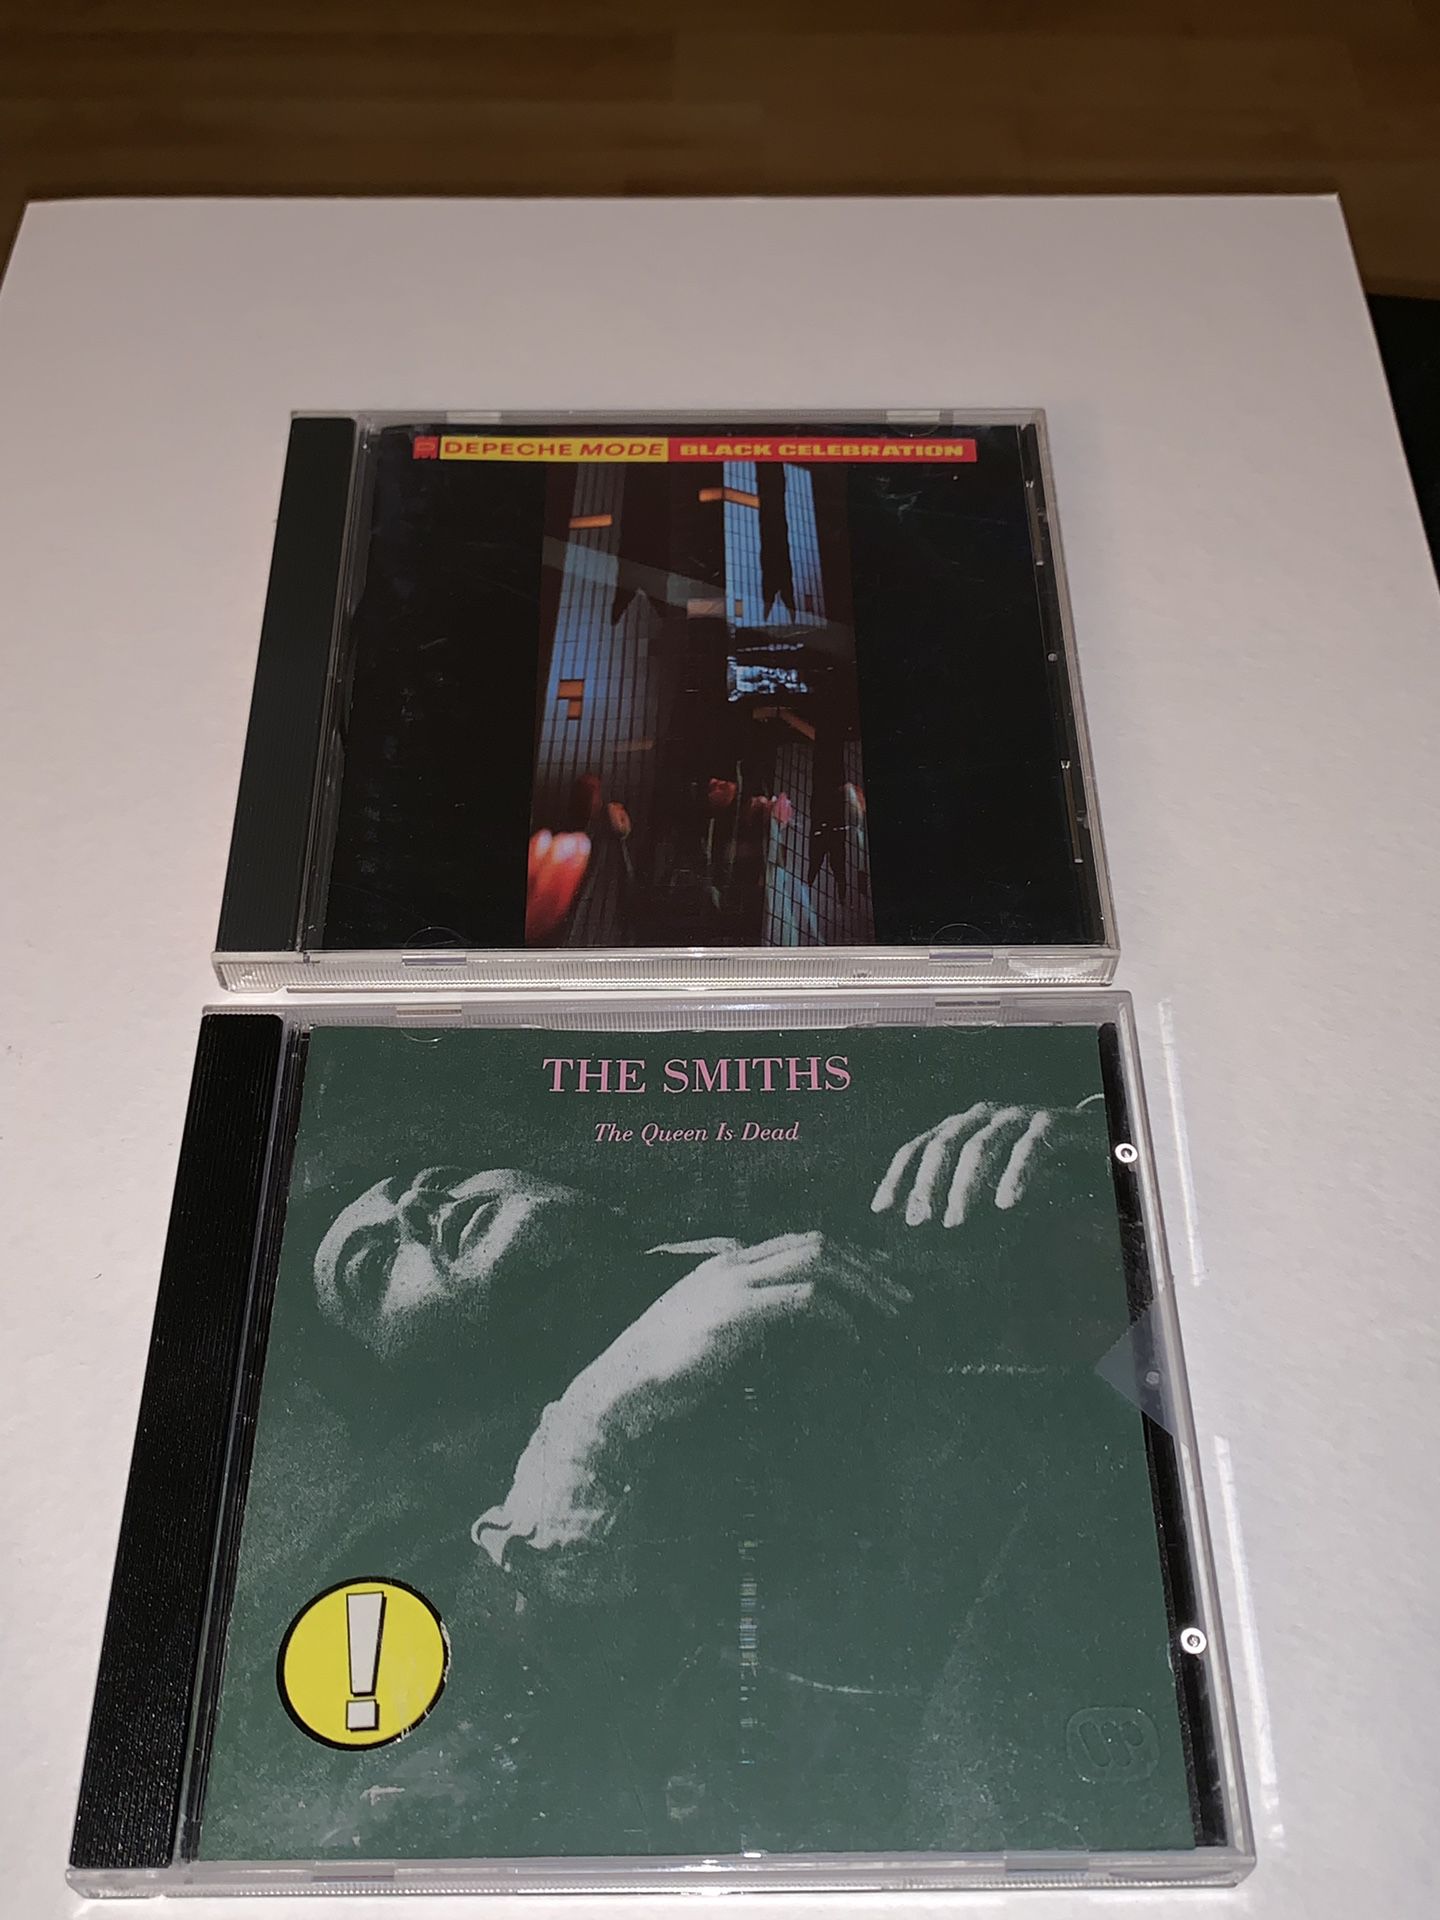 The Smiths “The Queen Is Dead” 1986 / Depeche Mode “Black Celebration” 1986